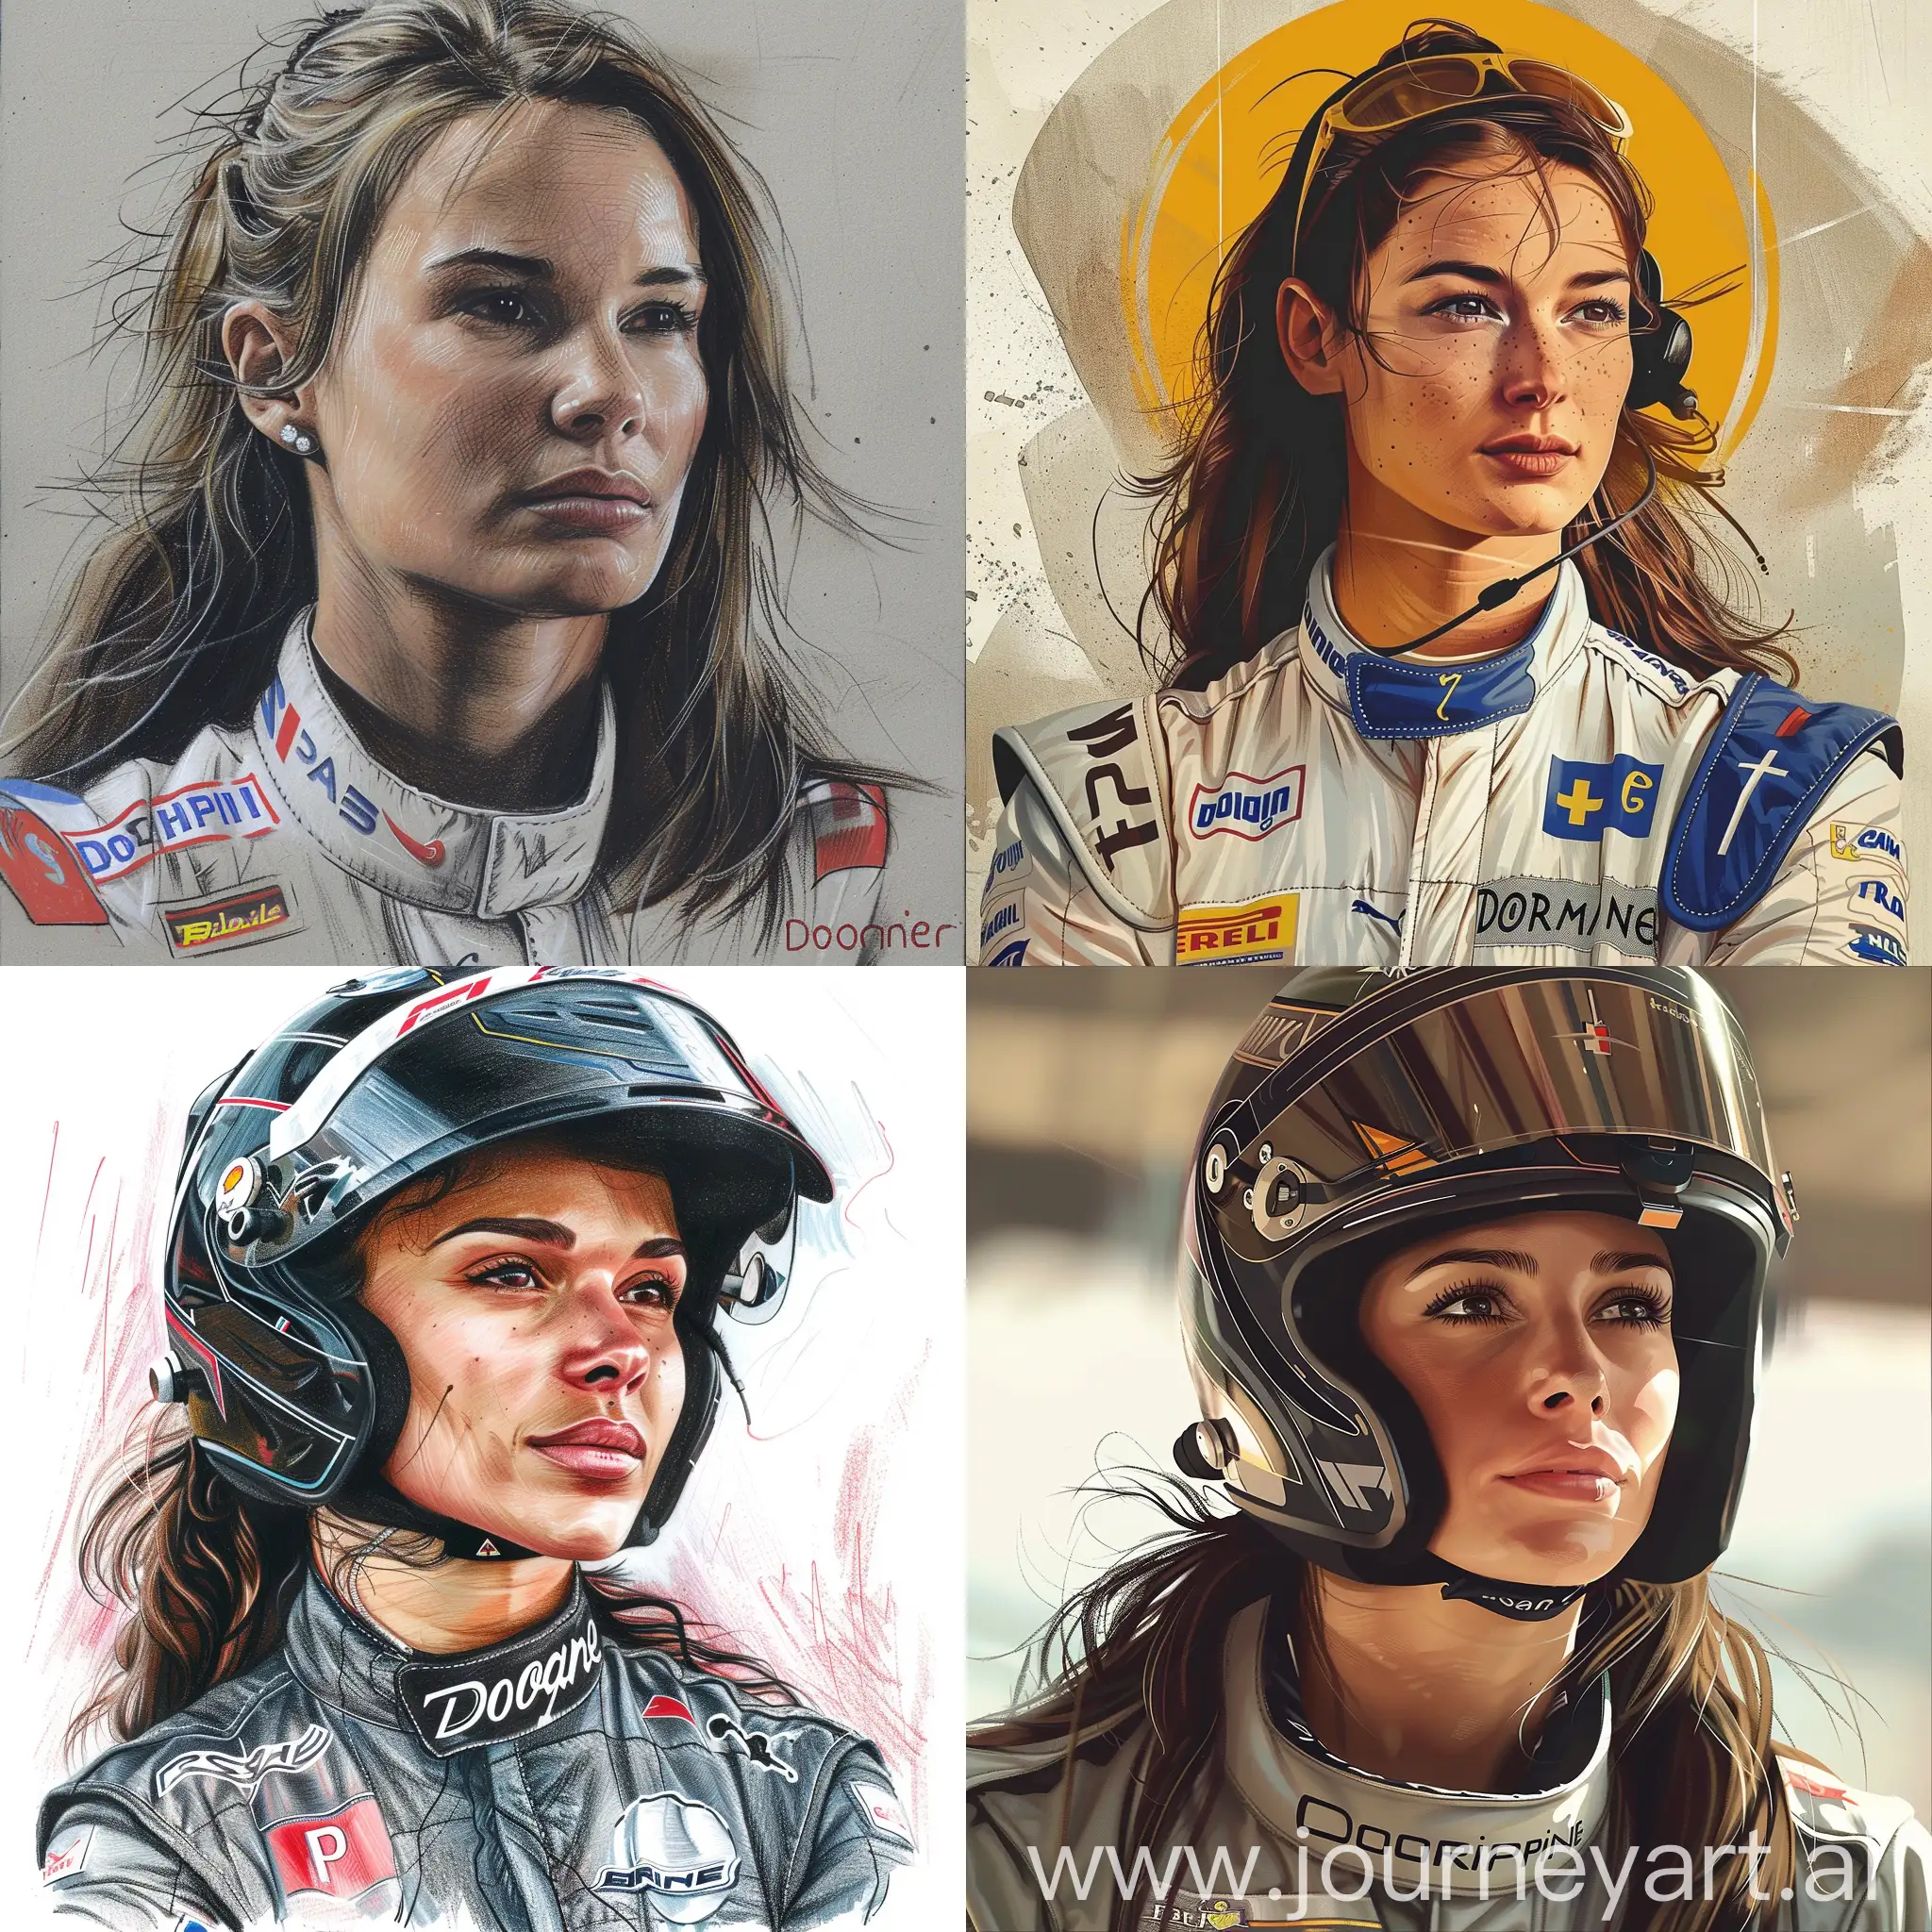 A Doriane Pin, a French race driver, drawing in a christian icon style